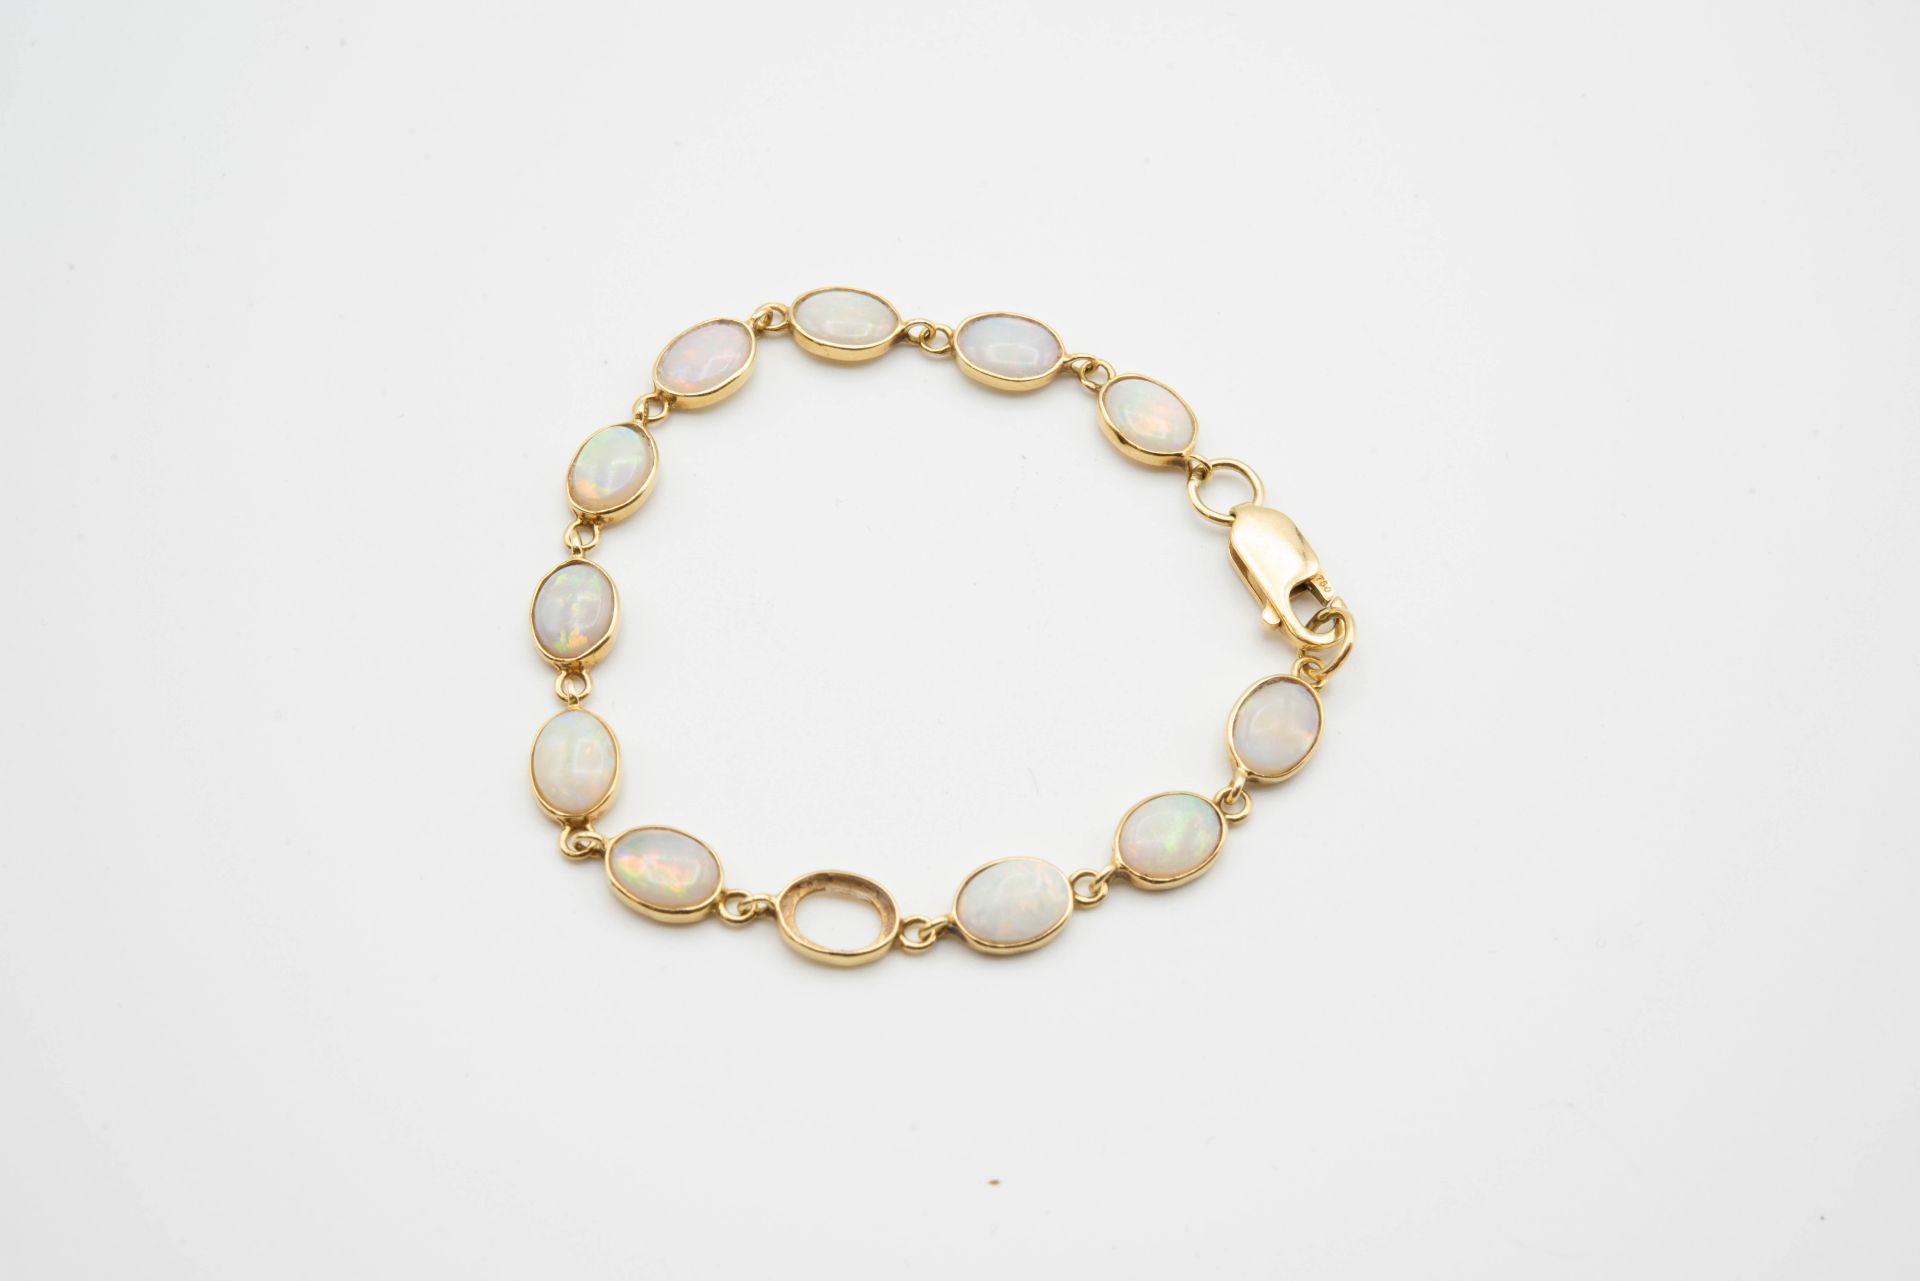 AN 18CT YELLOW GOLD AND OPAL BRACELET